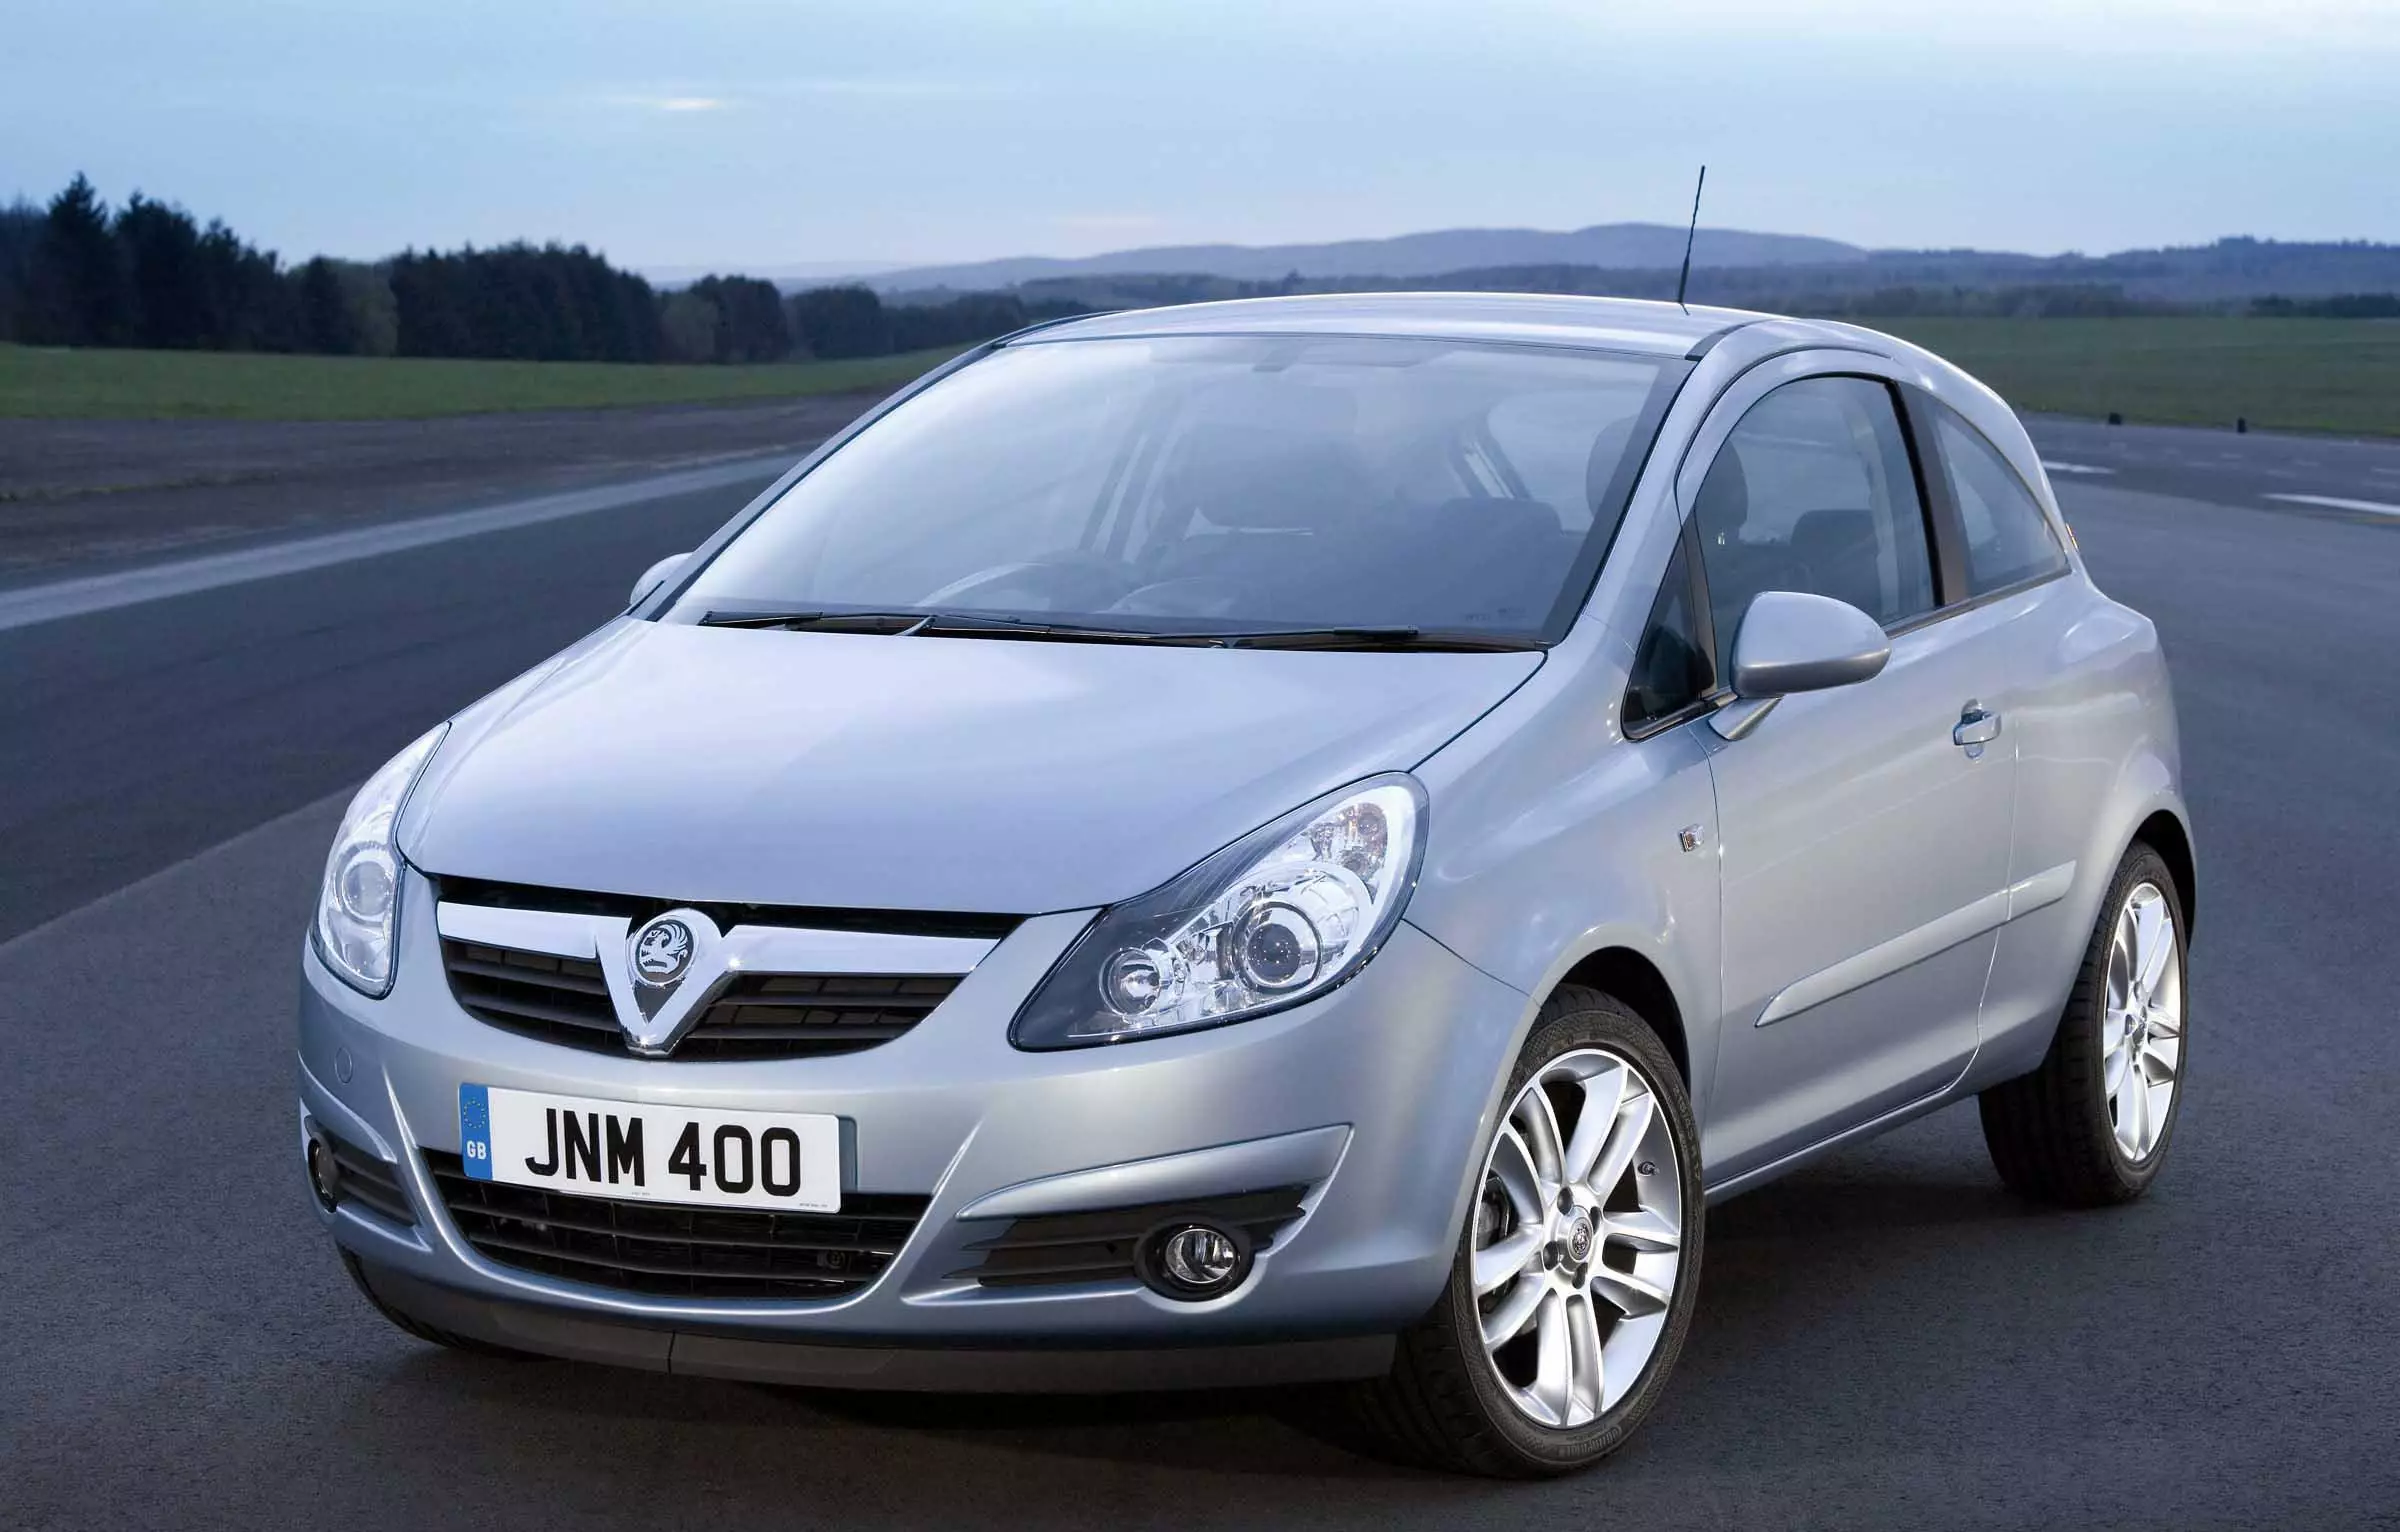 Vauxhall Corsa cars featured on the list.